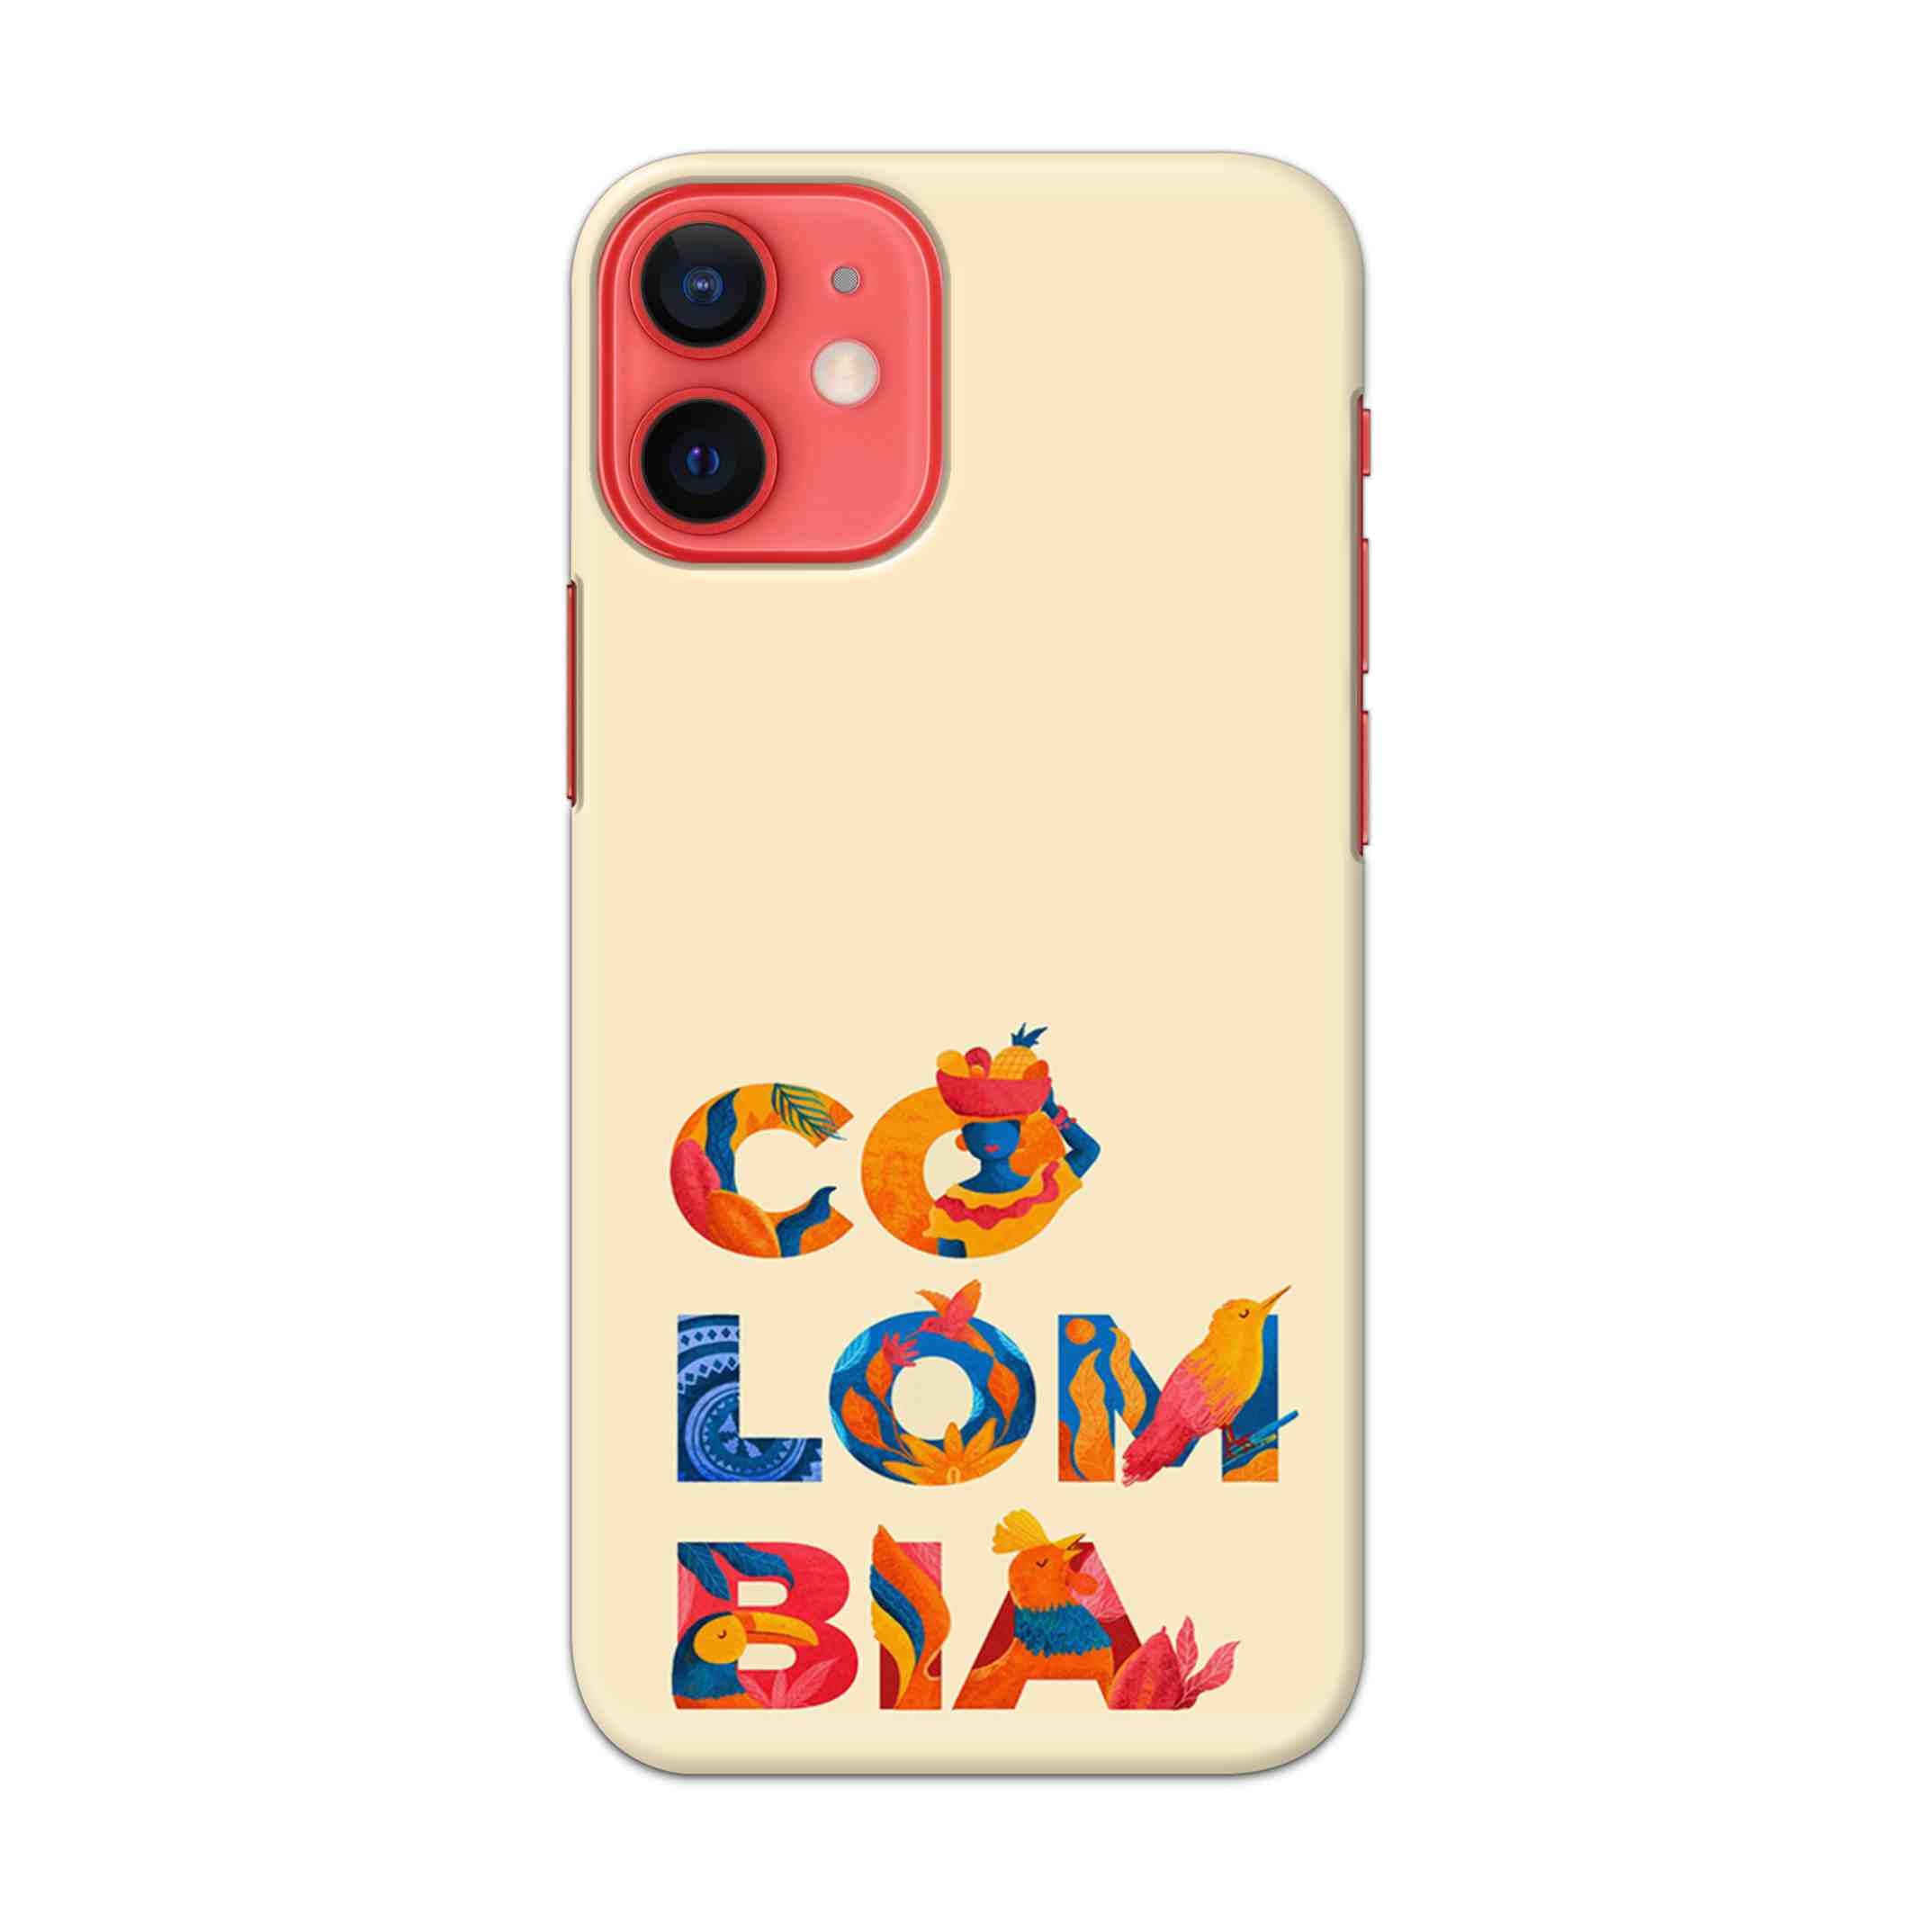 Buy Colombia Hard Back Mobile Phone Case/Cover For Apple iPhone 12 mini Online